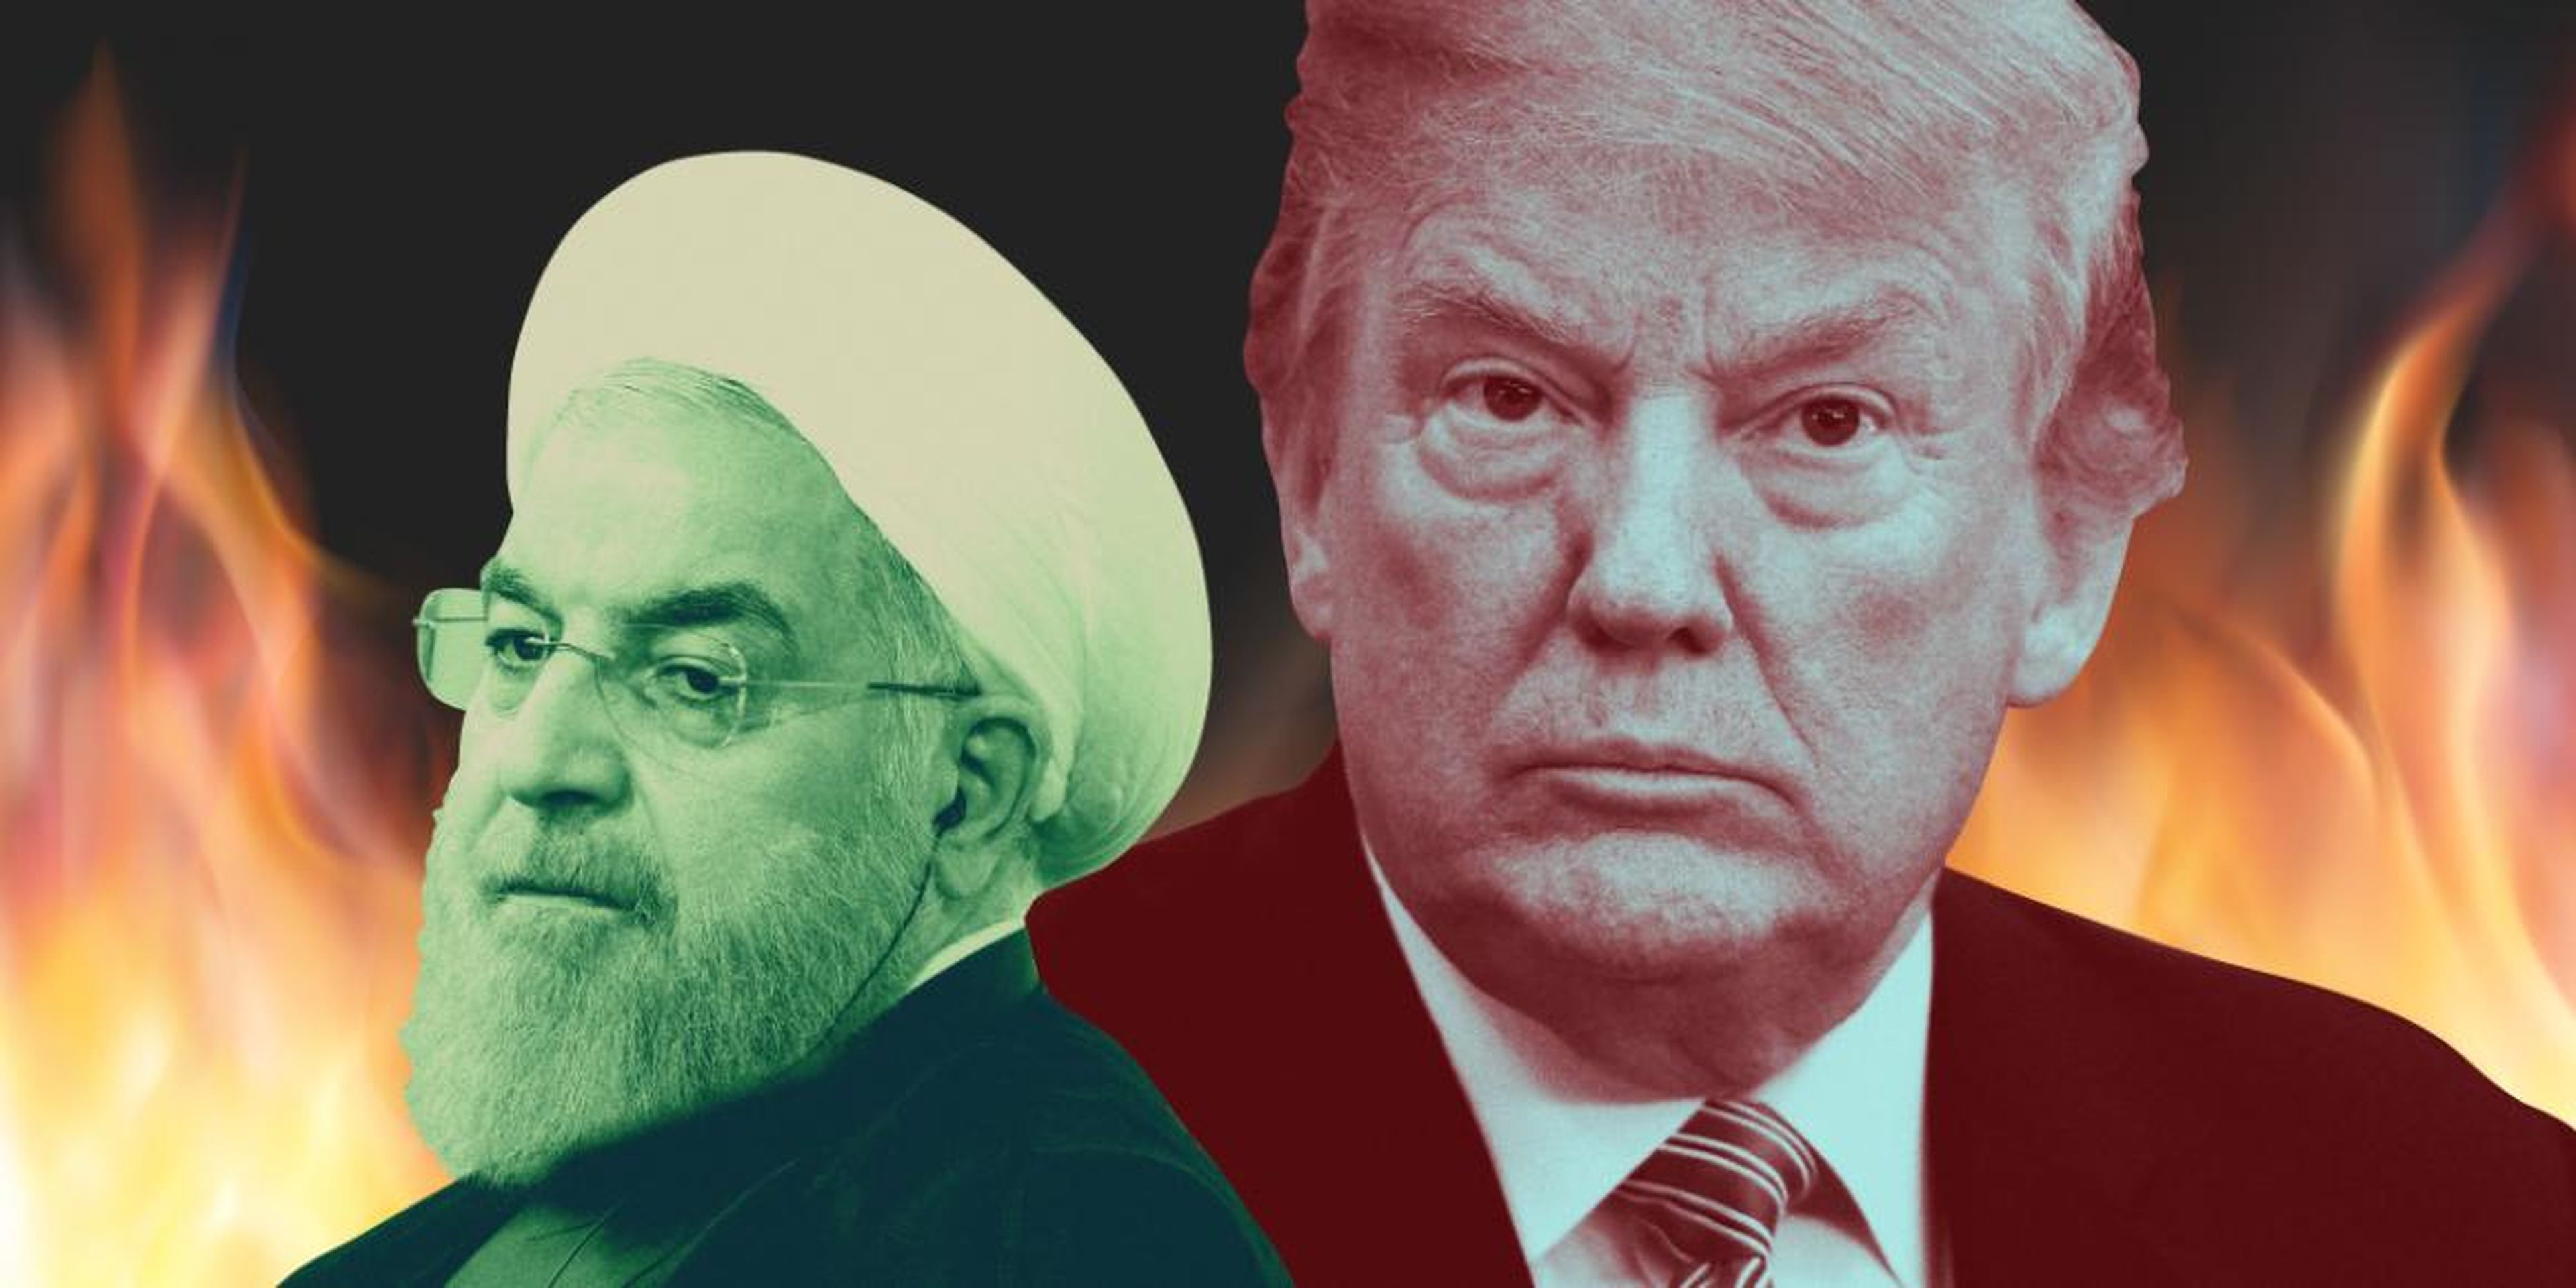 Trump is reportedly considering throwing a $15 billion lifeline to Iran